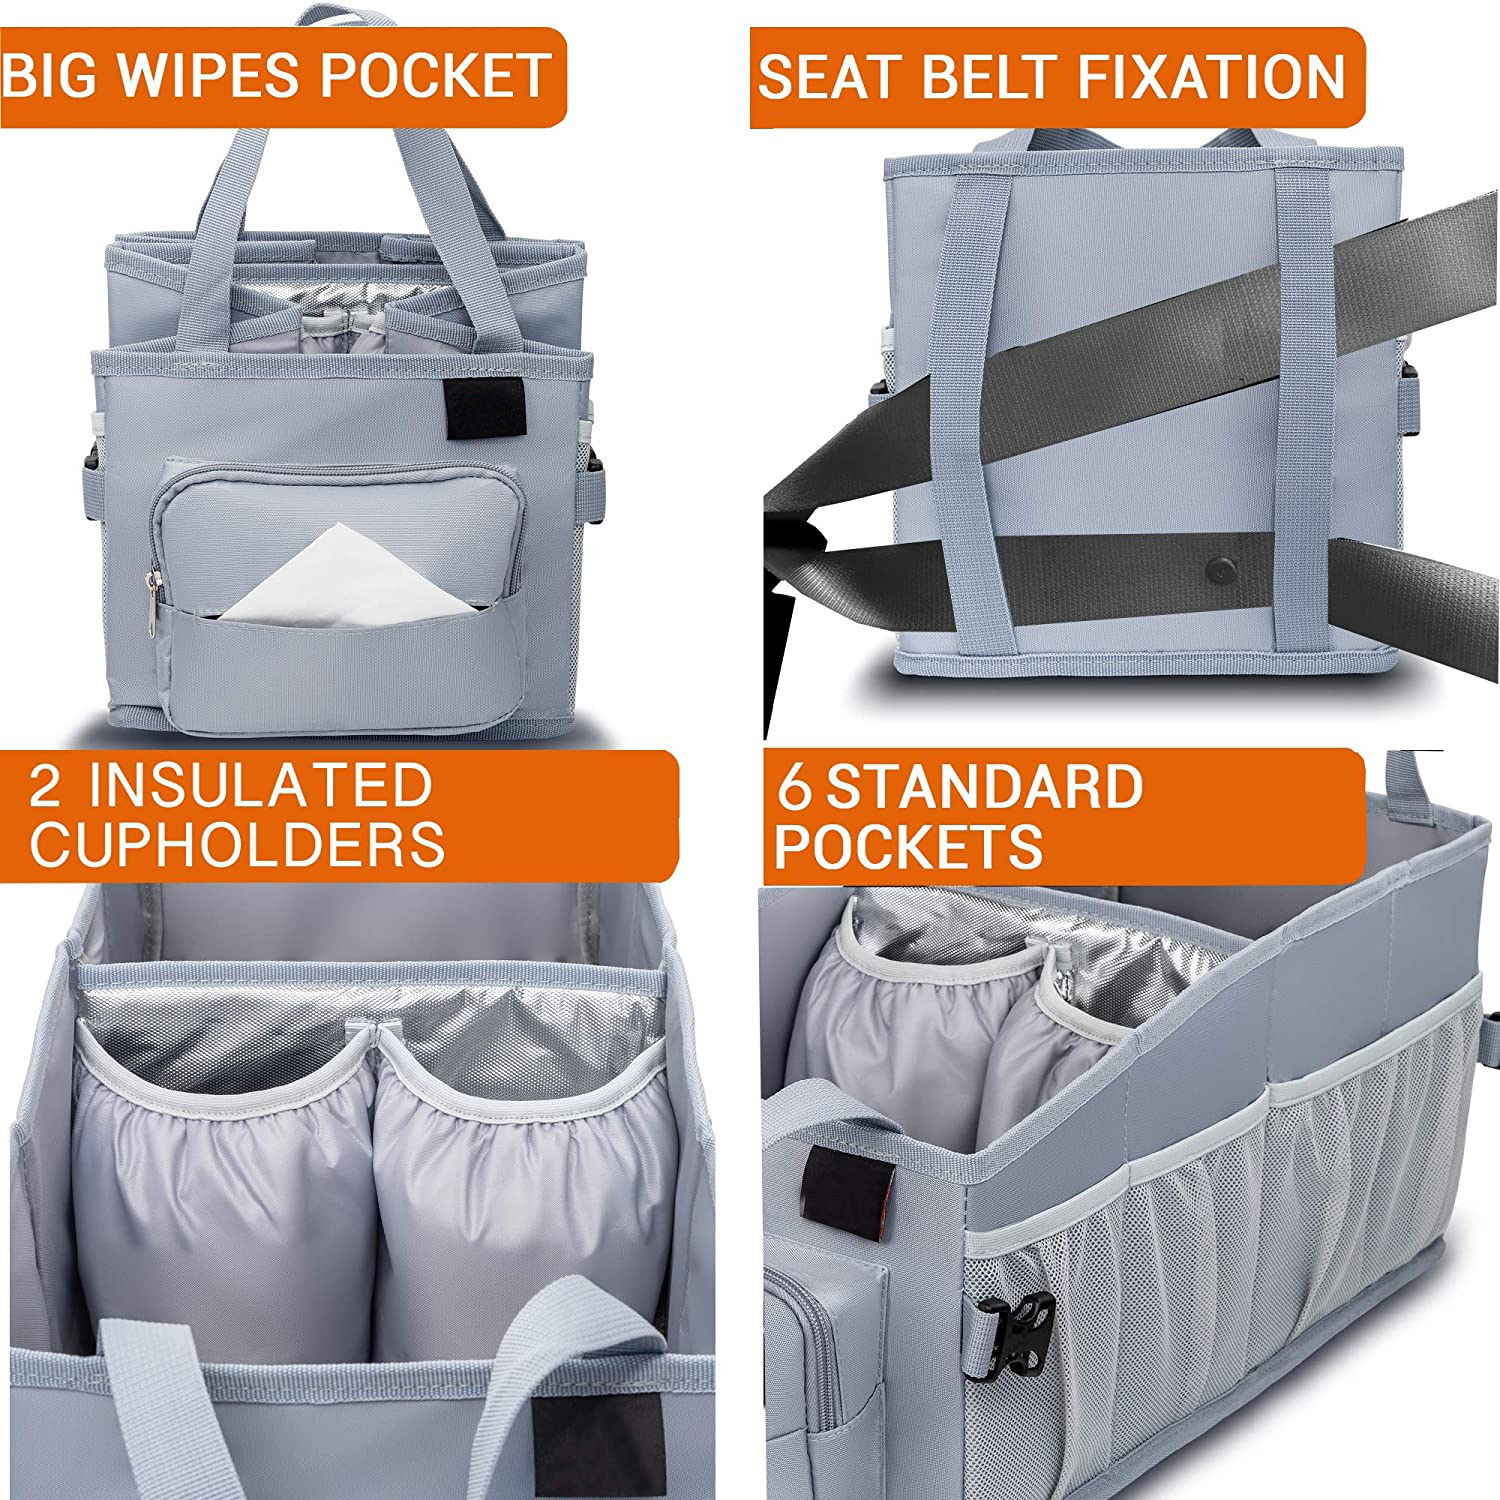 Car Organizer Between Seats Easy-to-Reach for Back Seat Travel Car Organizer with Tissue Box and Insulated Cup Holder